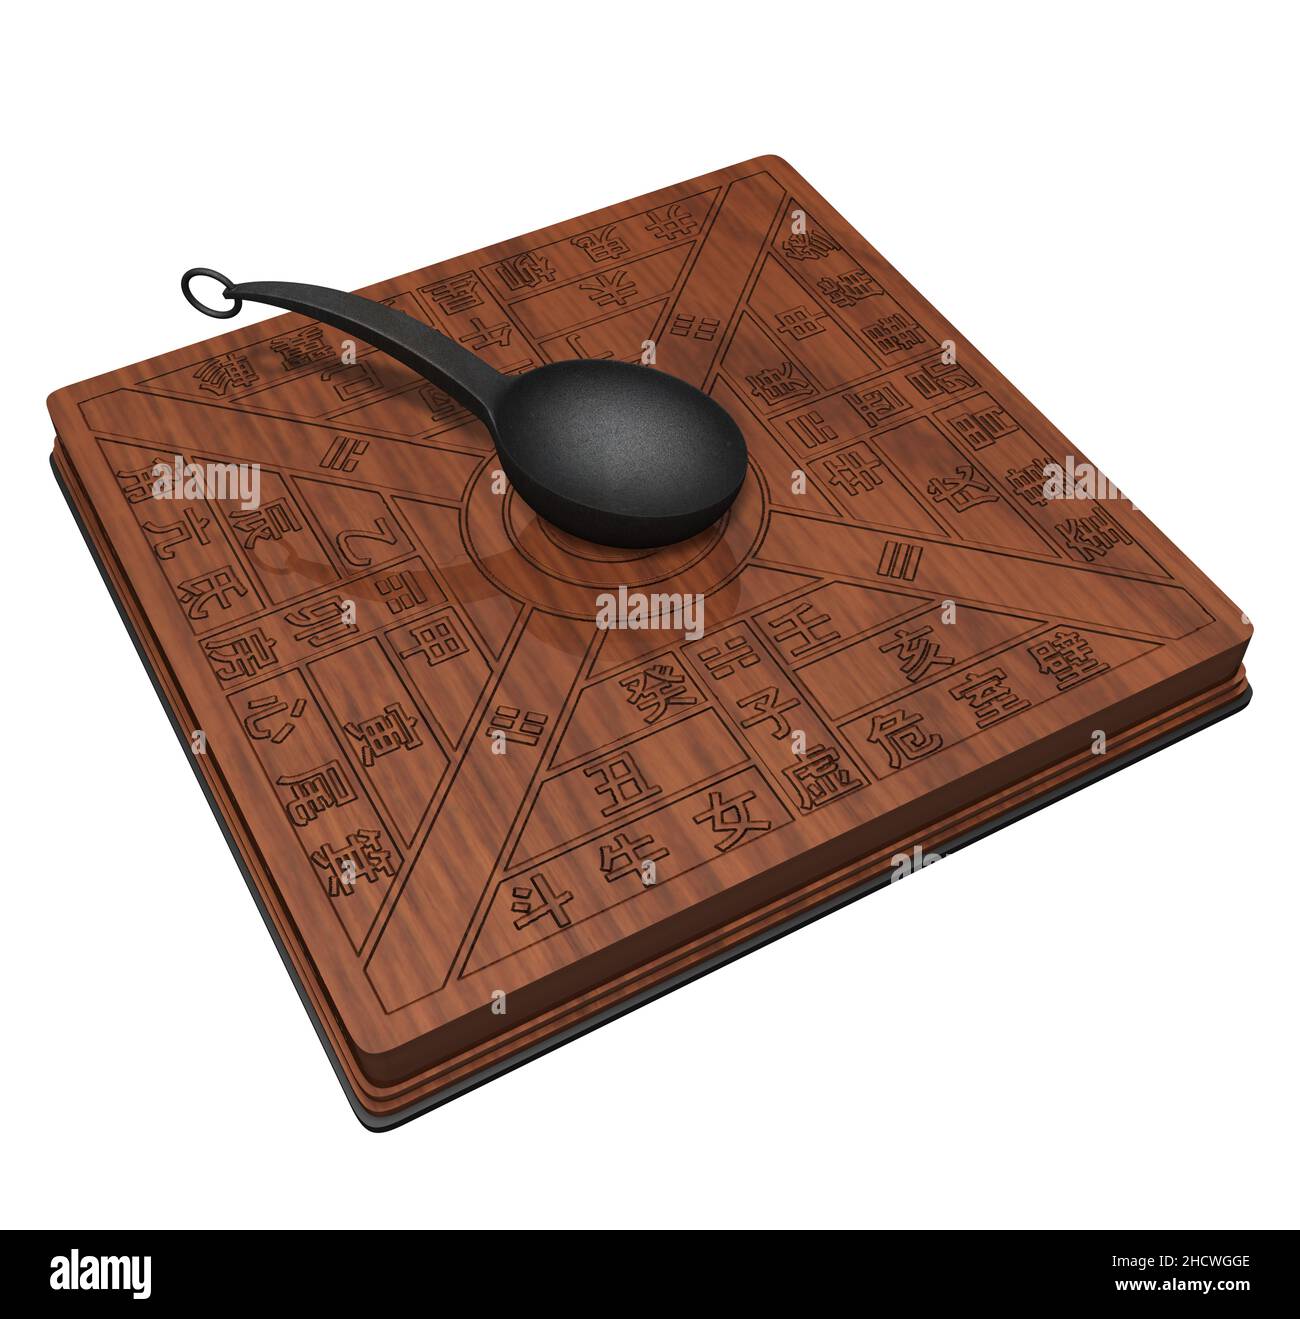 3D Rendering Illustration of an Ancient Chinese Compass known as NAN. Stock Photo